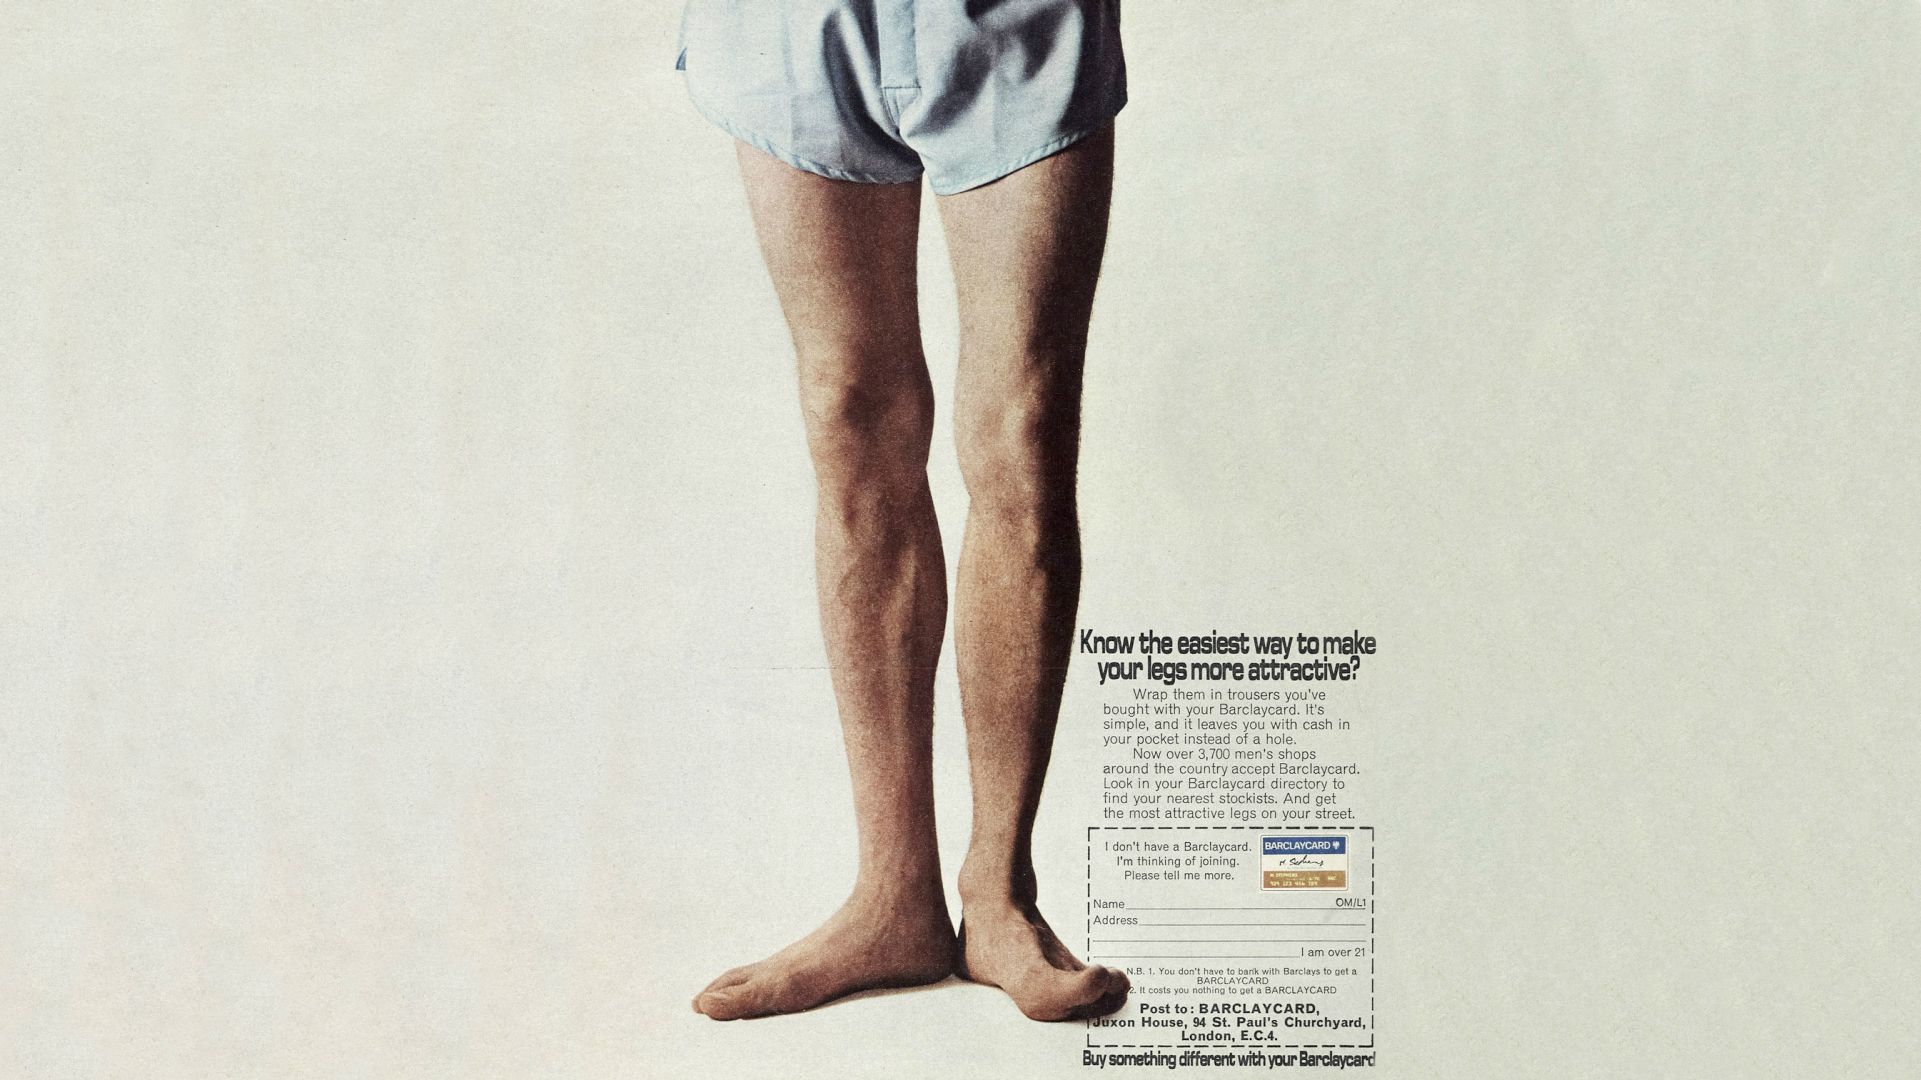 An old Barclays advert with a pair of male legs. The advert reads: "know the easiest way to make your legs more attractive?"